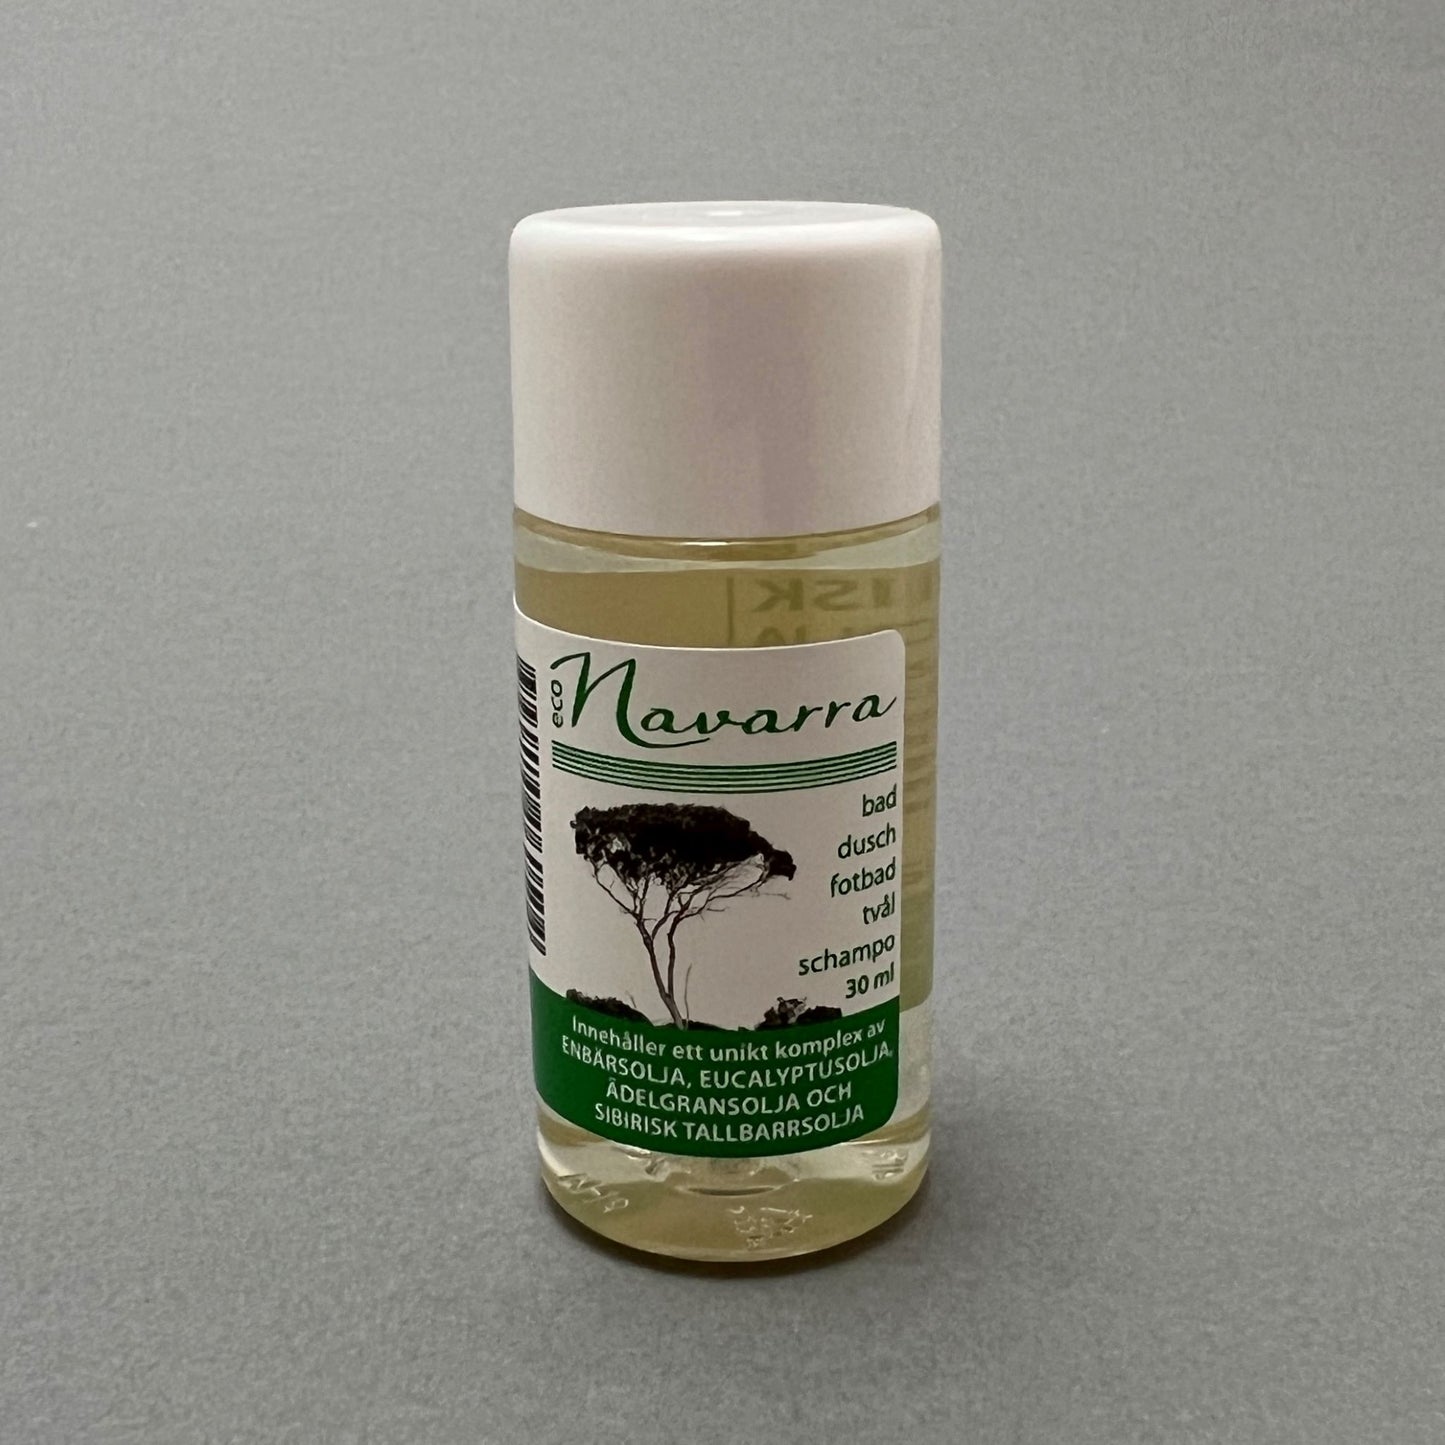 A 30ml white soap bottle containing Navarra health bath oil, standing on a gray background